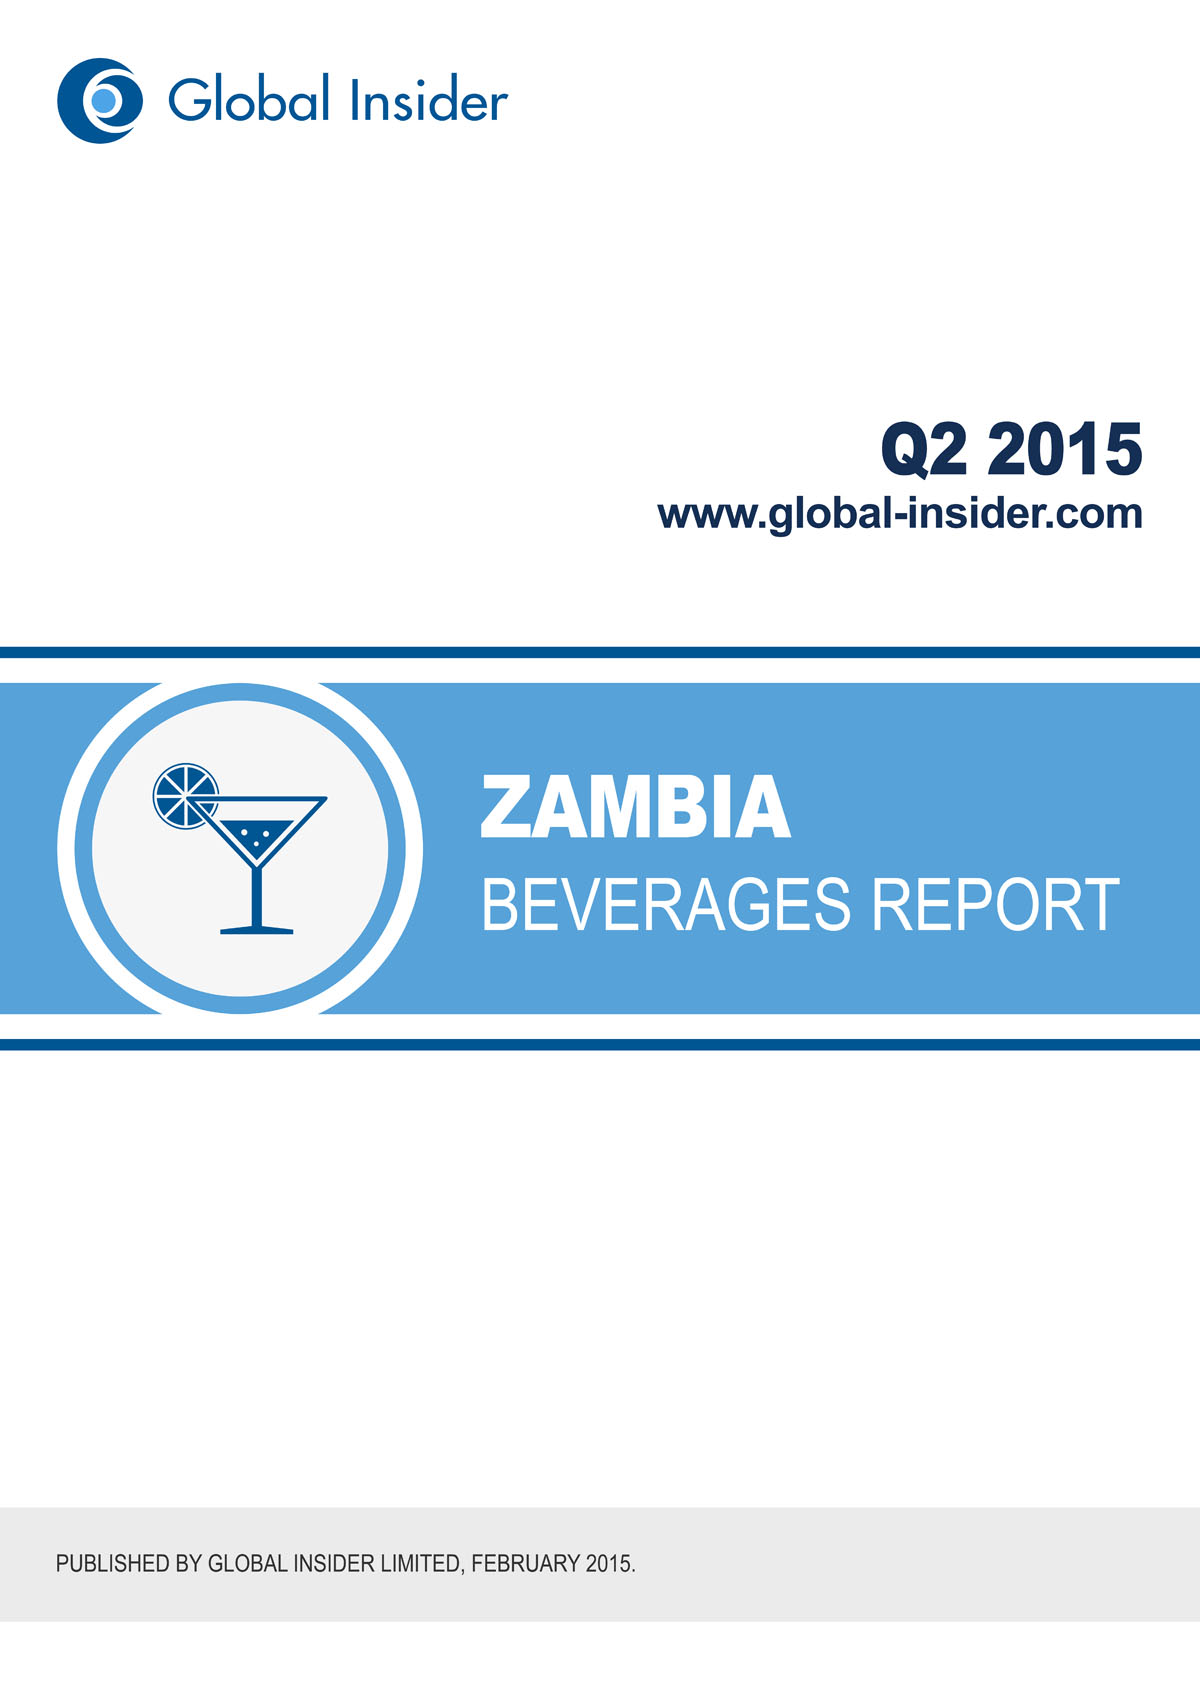 Zambia Beverages Report